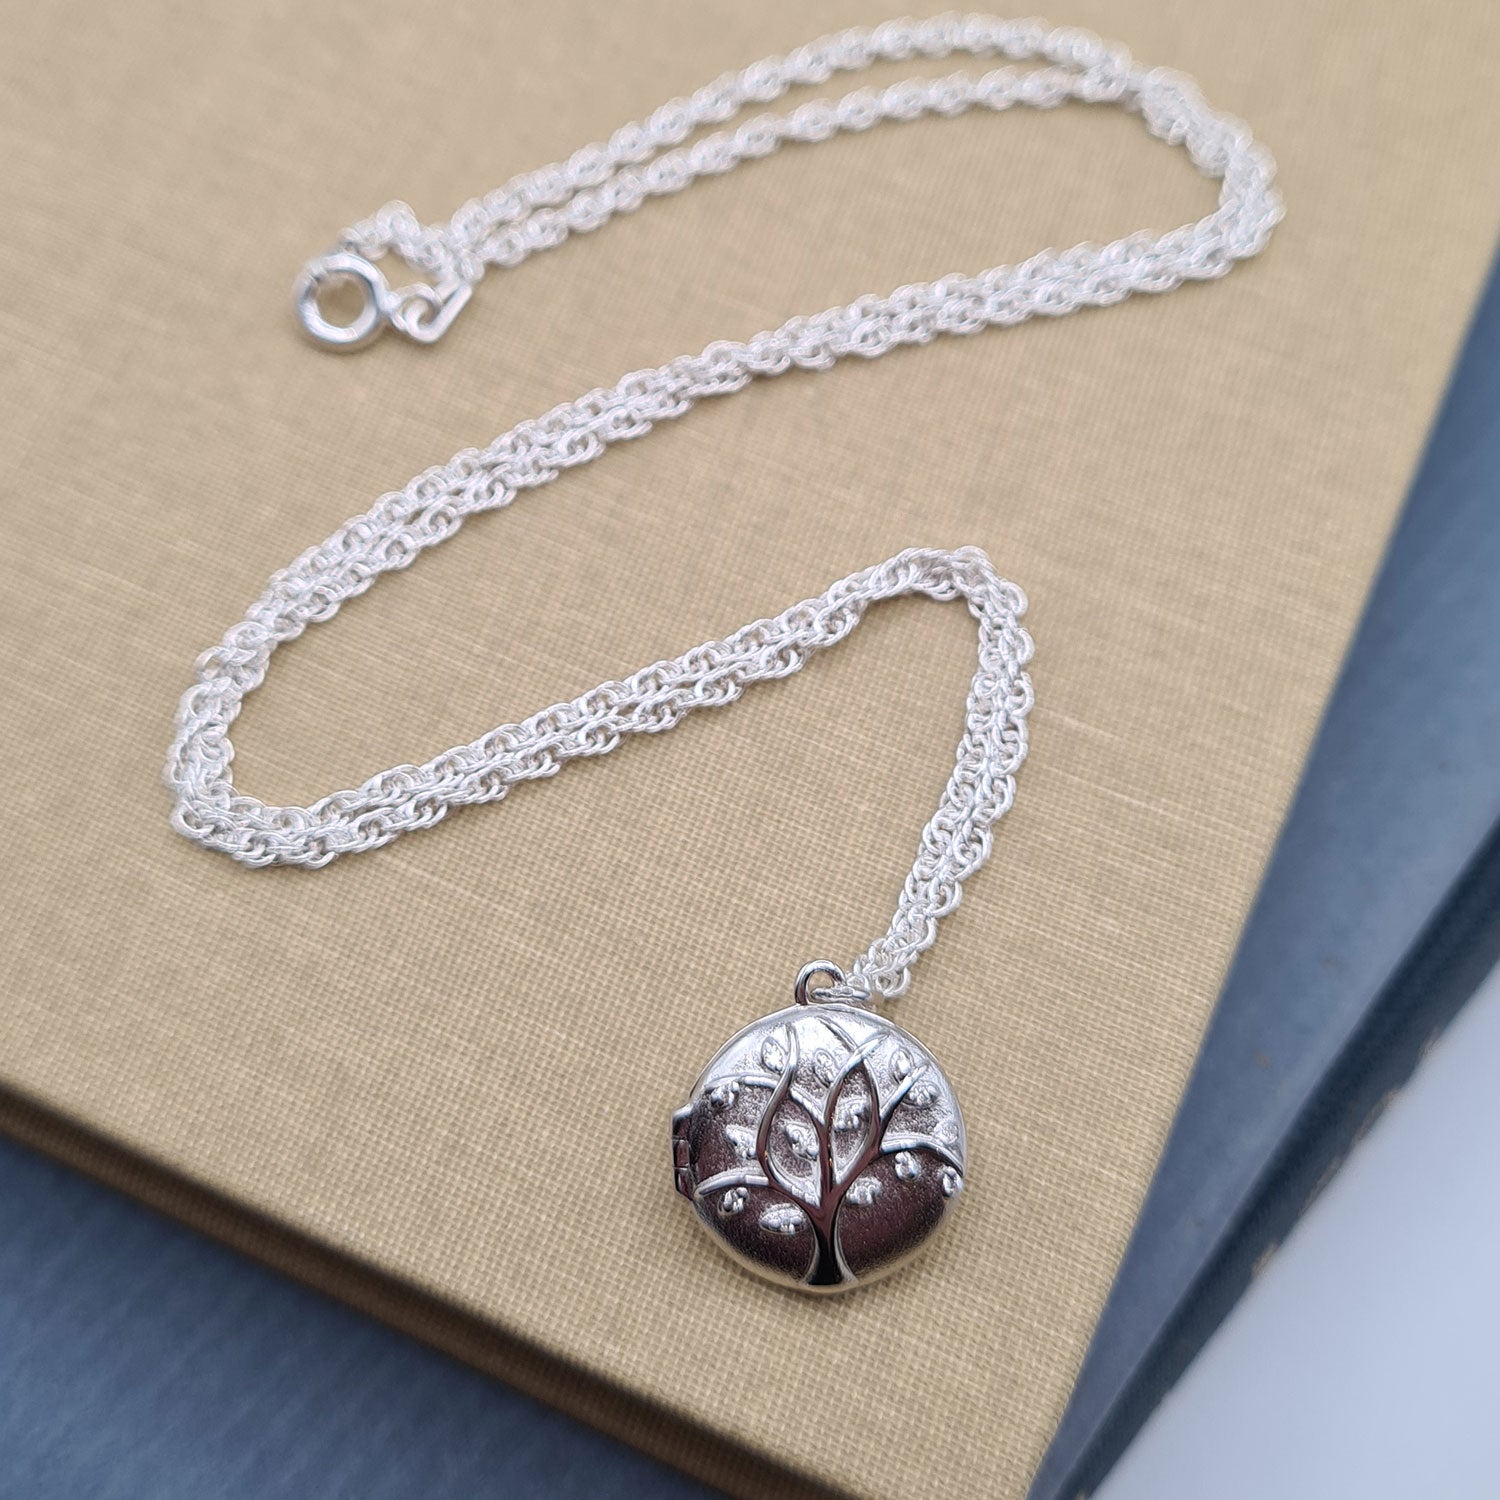 Tree of Life Locket Pendant Necklace in Sterling Silver